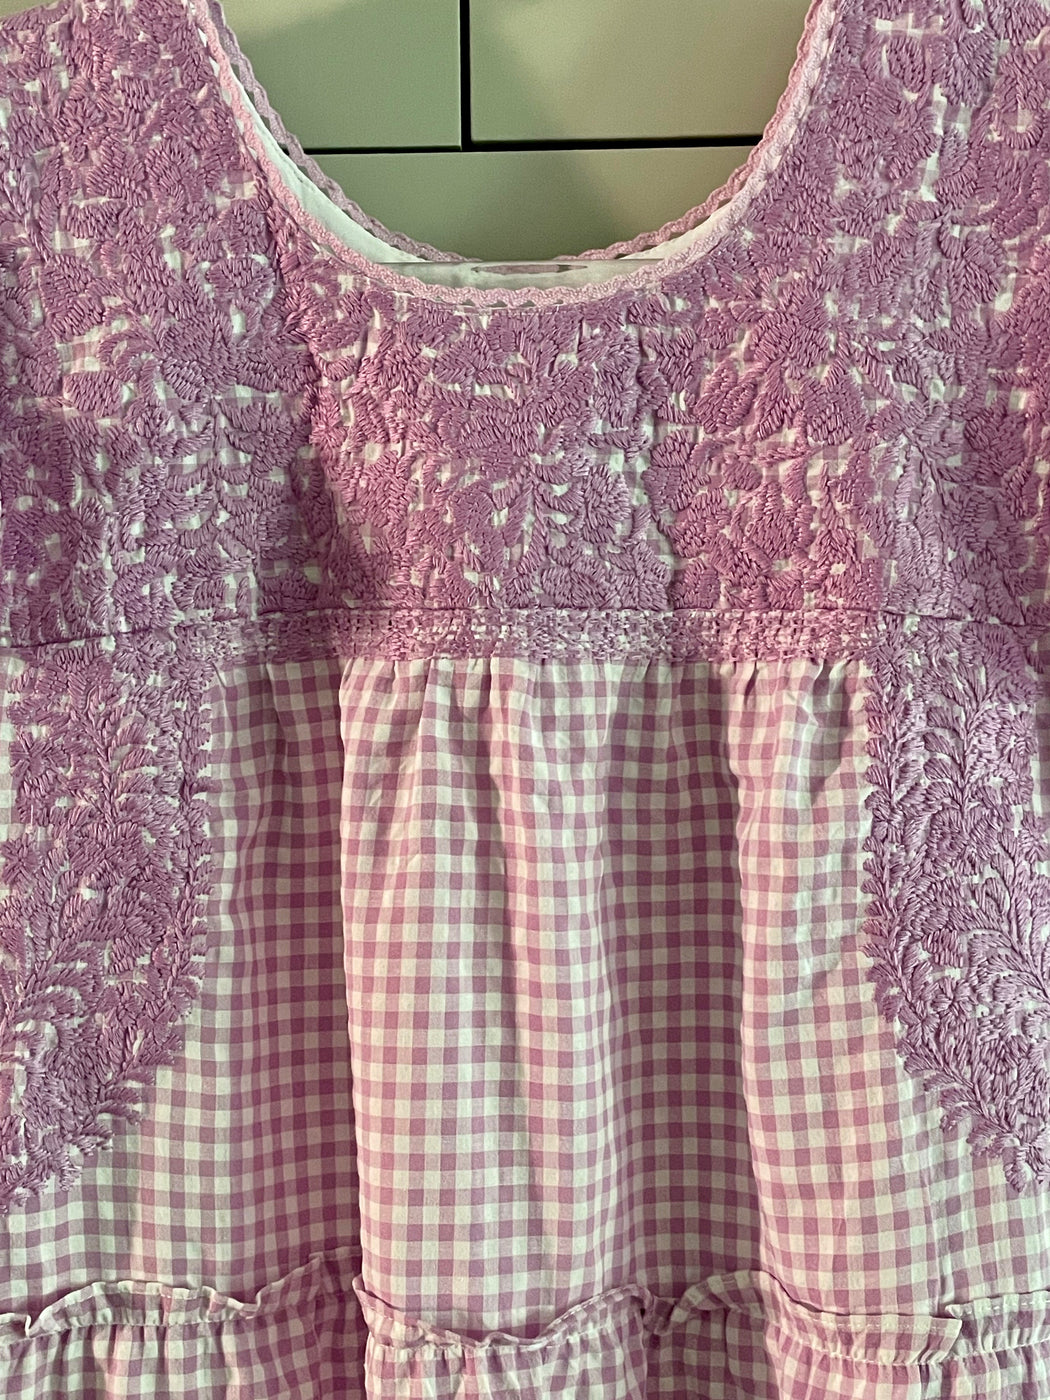 Hand-Embroidered Mexican Dress - Lilac Gingham